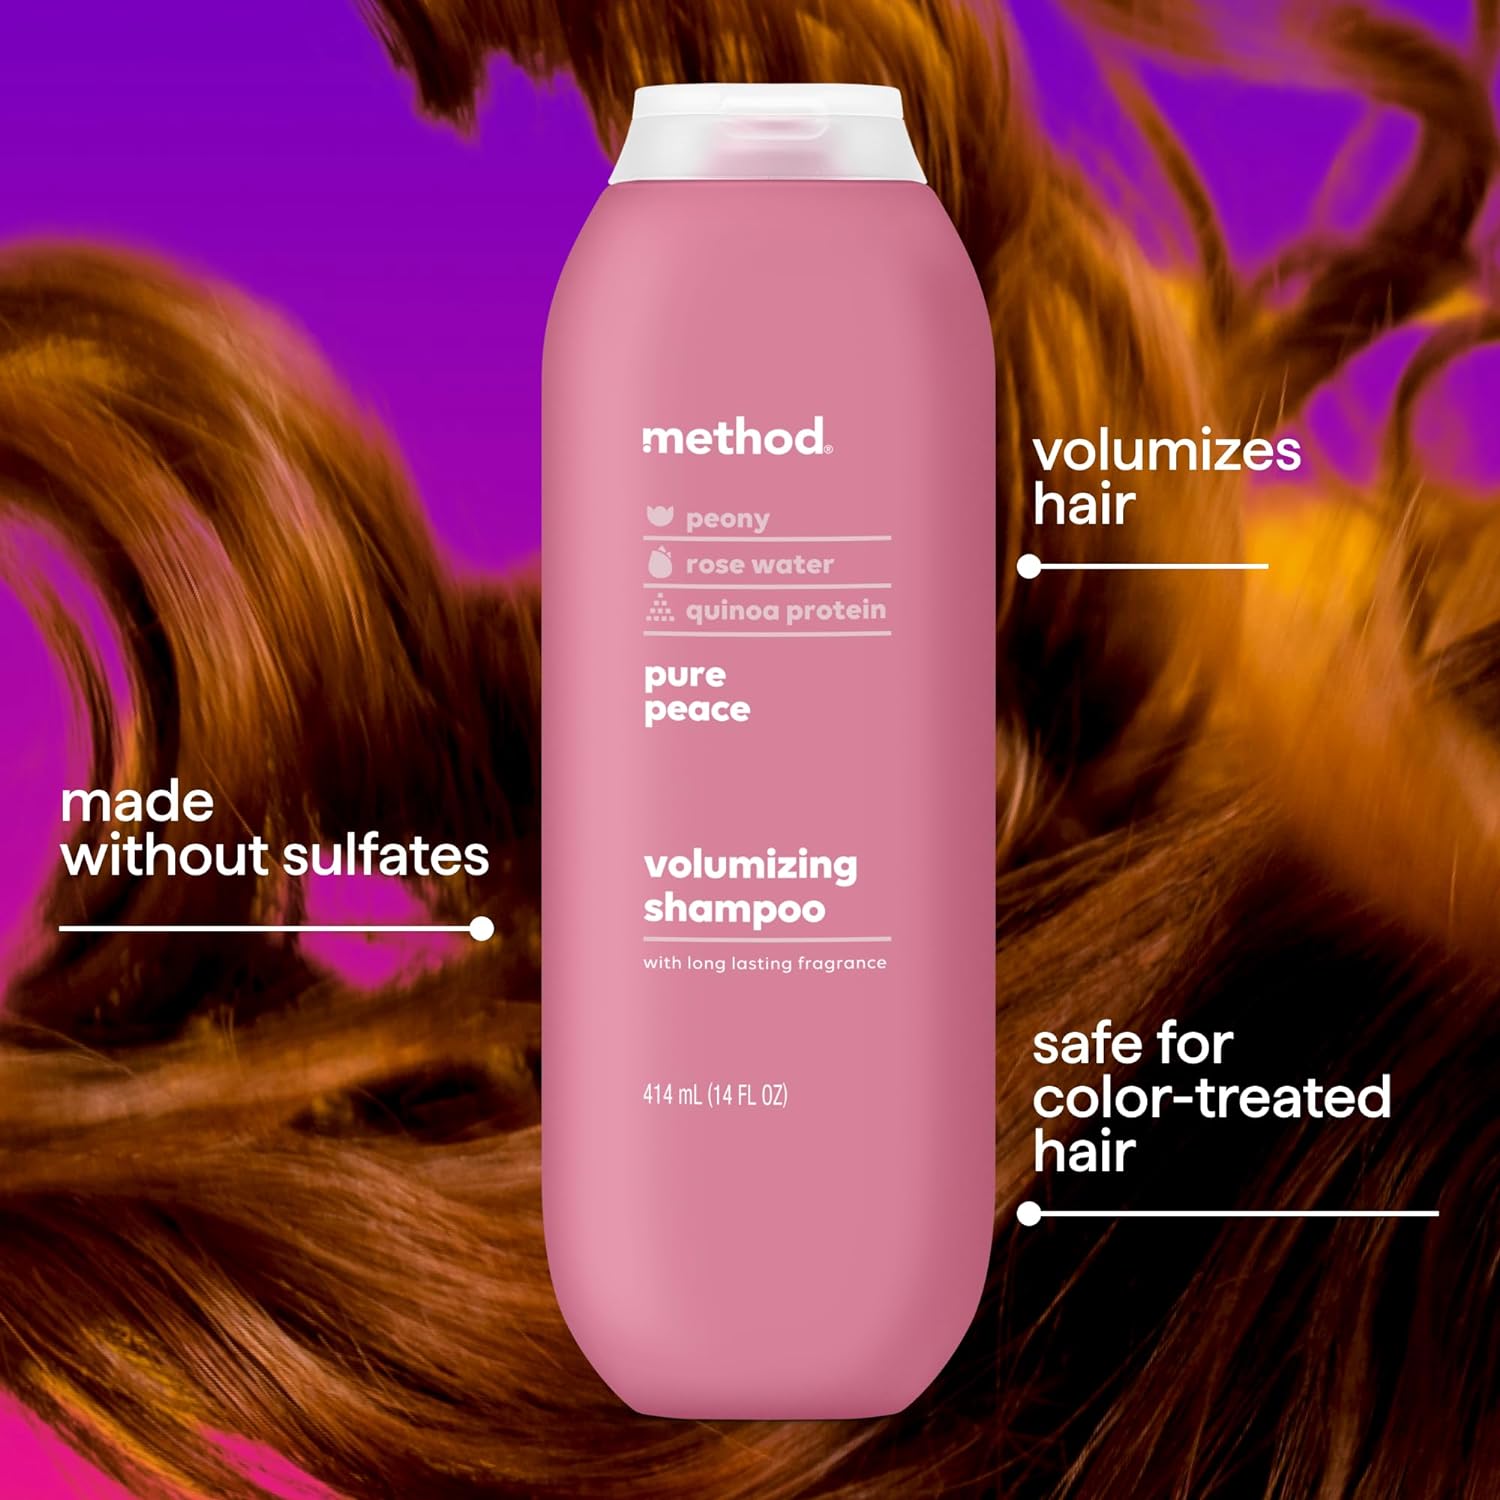 Method Volumizing Shampoo, Pure Peace with Rose, Peony, and Pink Sea Salt Scent Notes, Paraben and Sulfate Free, 14 oz (Pack of 1) : Beauty & Personal Care